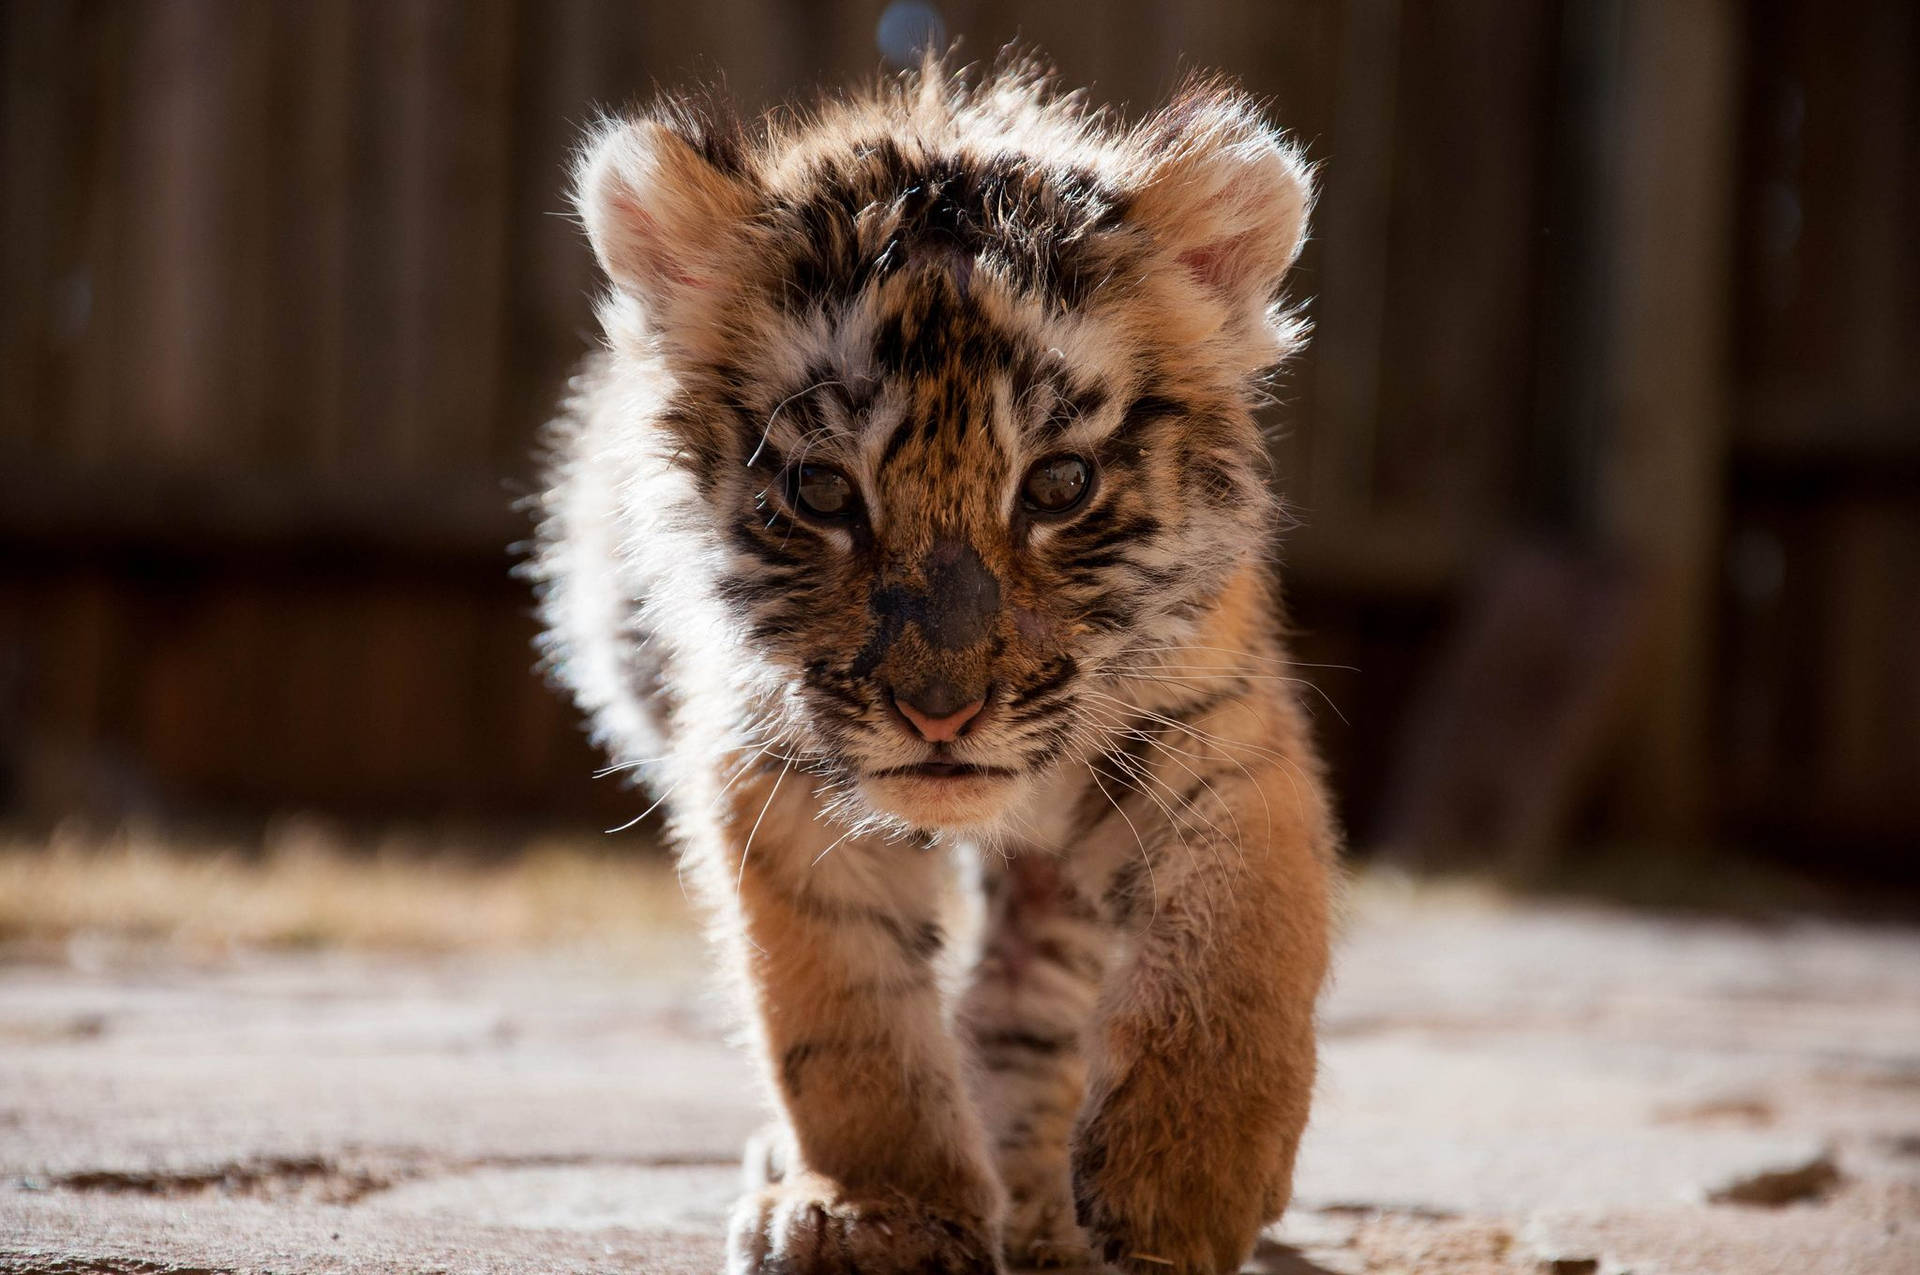 Baby Tiger Prowling